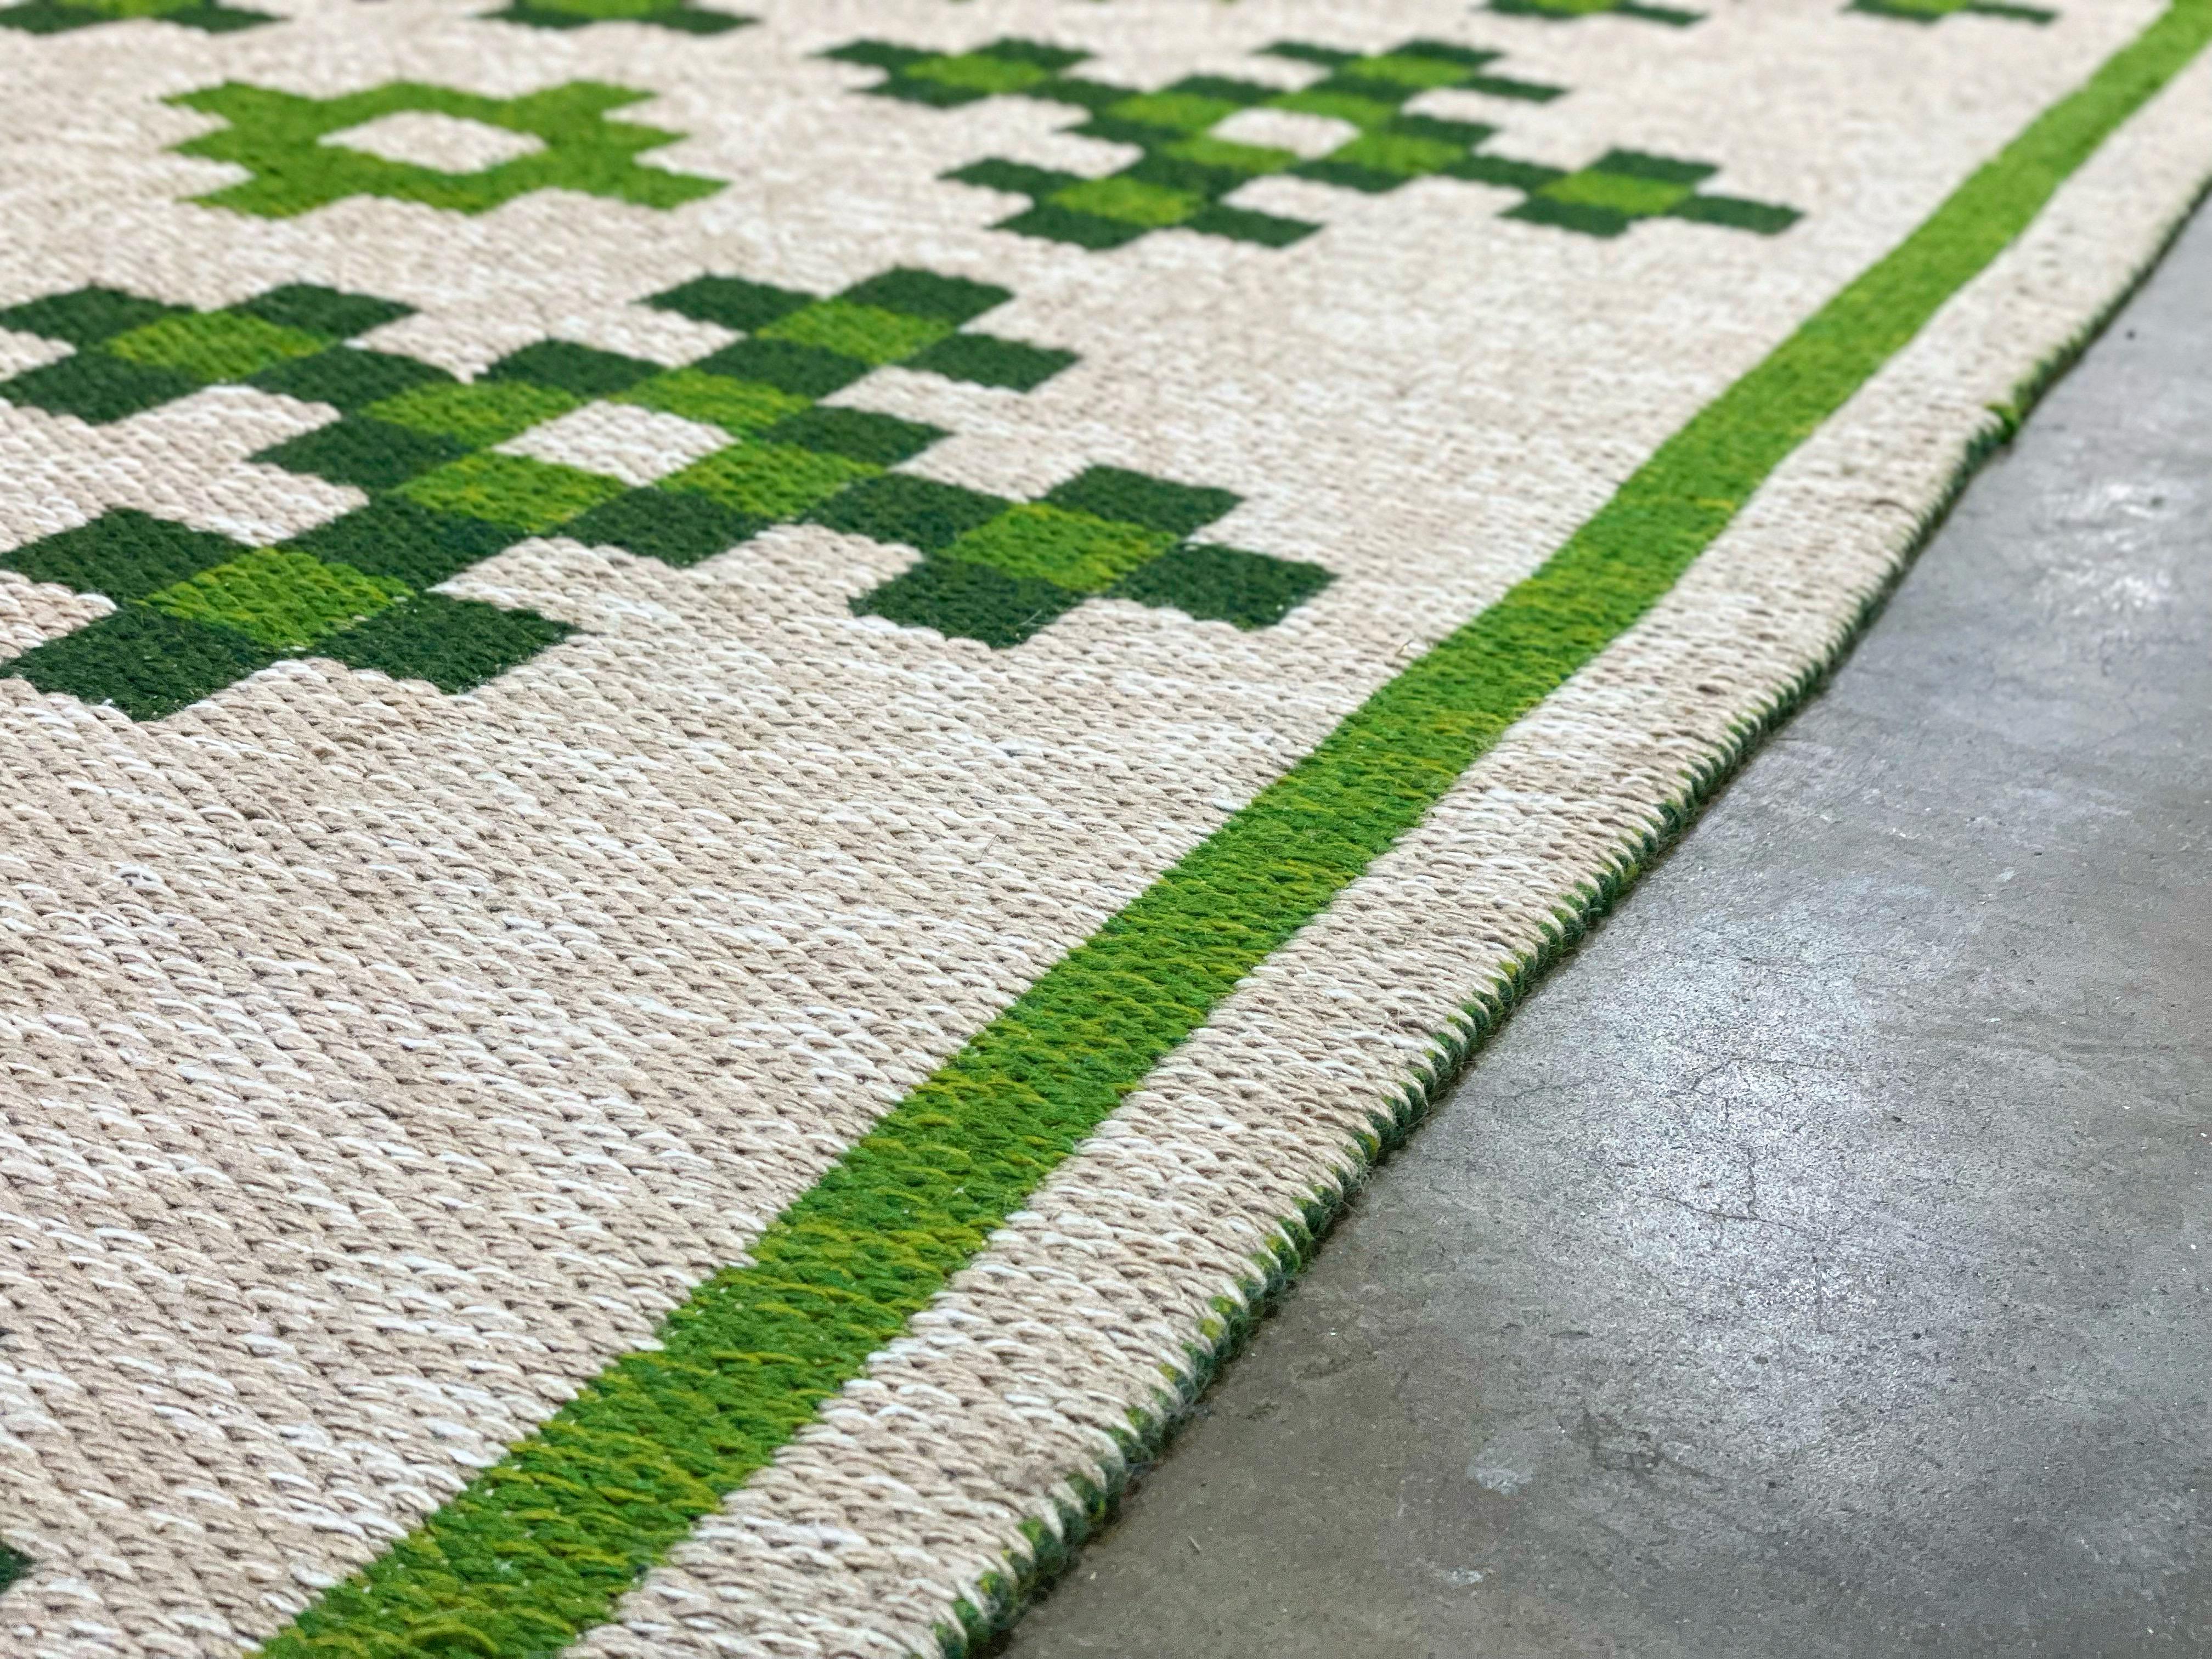 Scandinavian Mid-Century Green Khaki Wool Rya Rug, Tabergs, New Old Stock In Excellent Condition For Sale In Decatur, GA